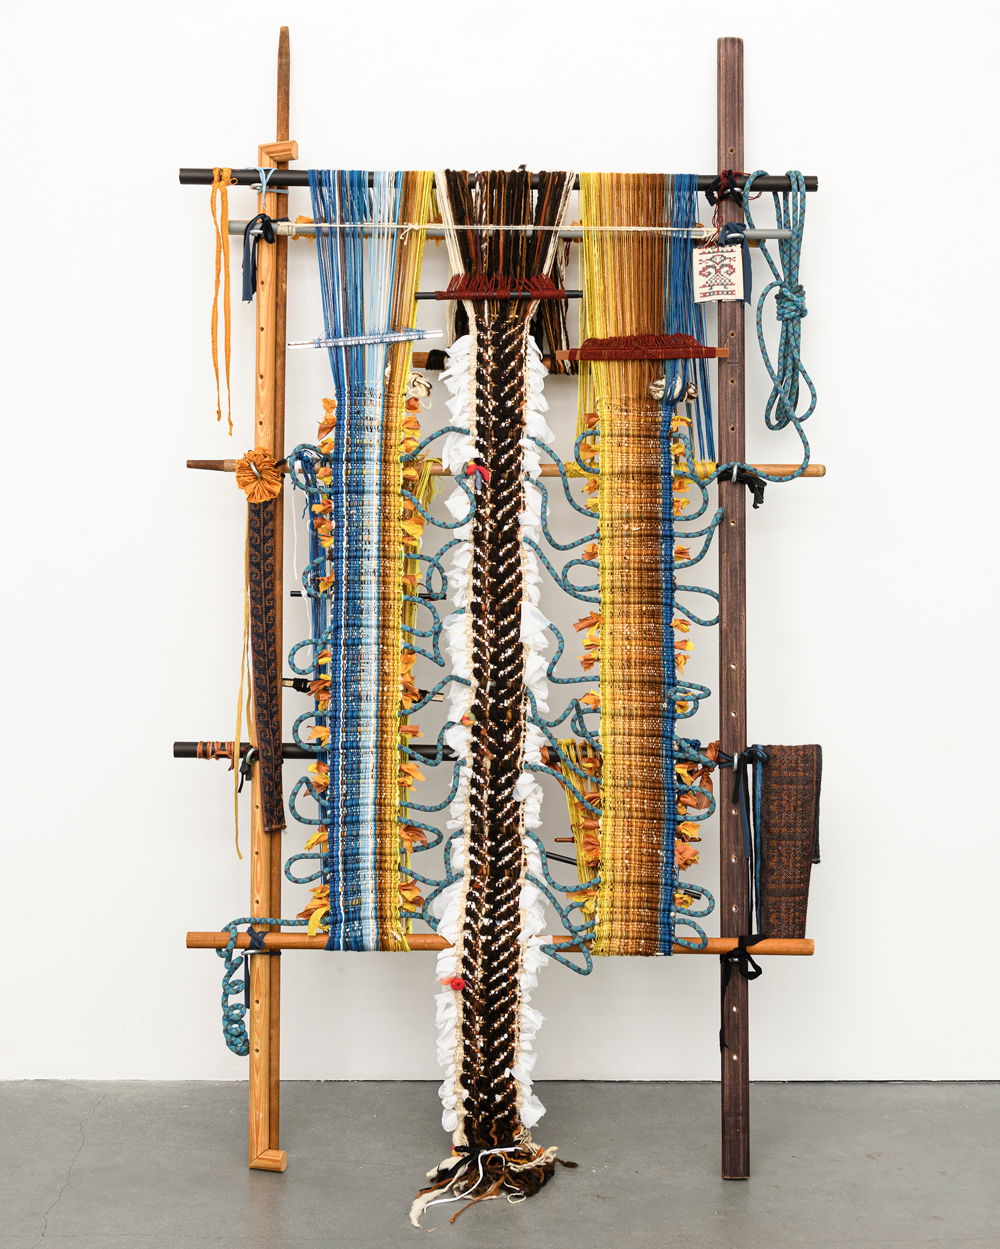 A colorful sculptural weaving that is framed on a wooden loom. There are three vertical panels of finished textiles. The panels to the right and left are gradients of cool blues that transition to warm oranges. The center panel is a black fish-bone pattern on a white background. Waves of blue rope twist between the three panels, connecting them.